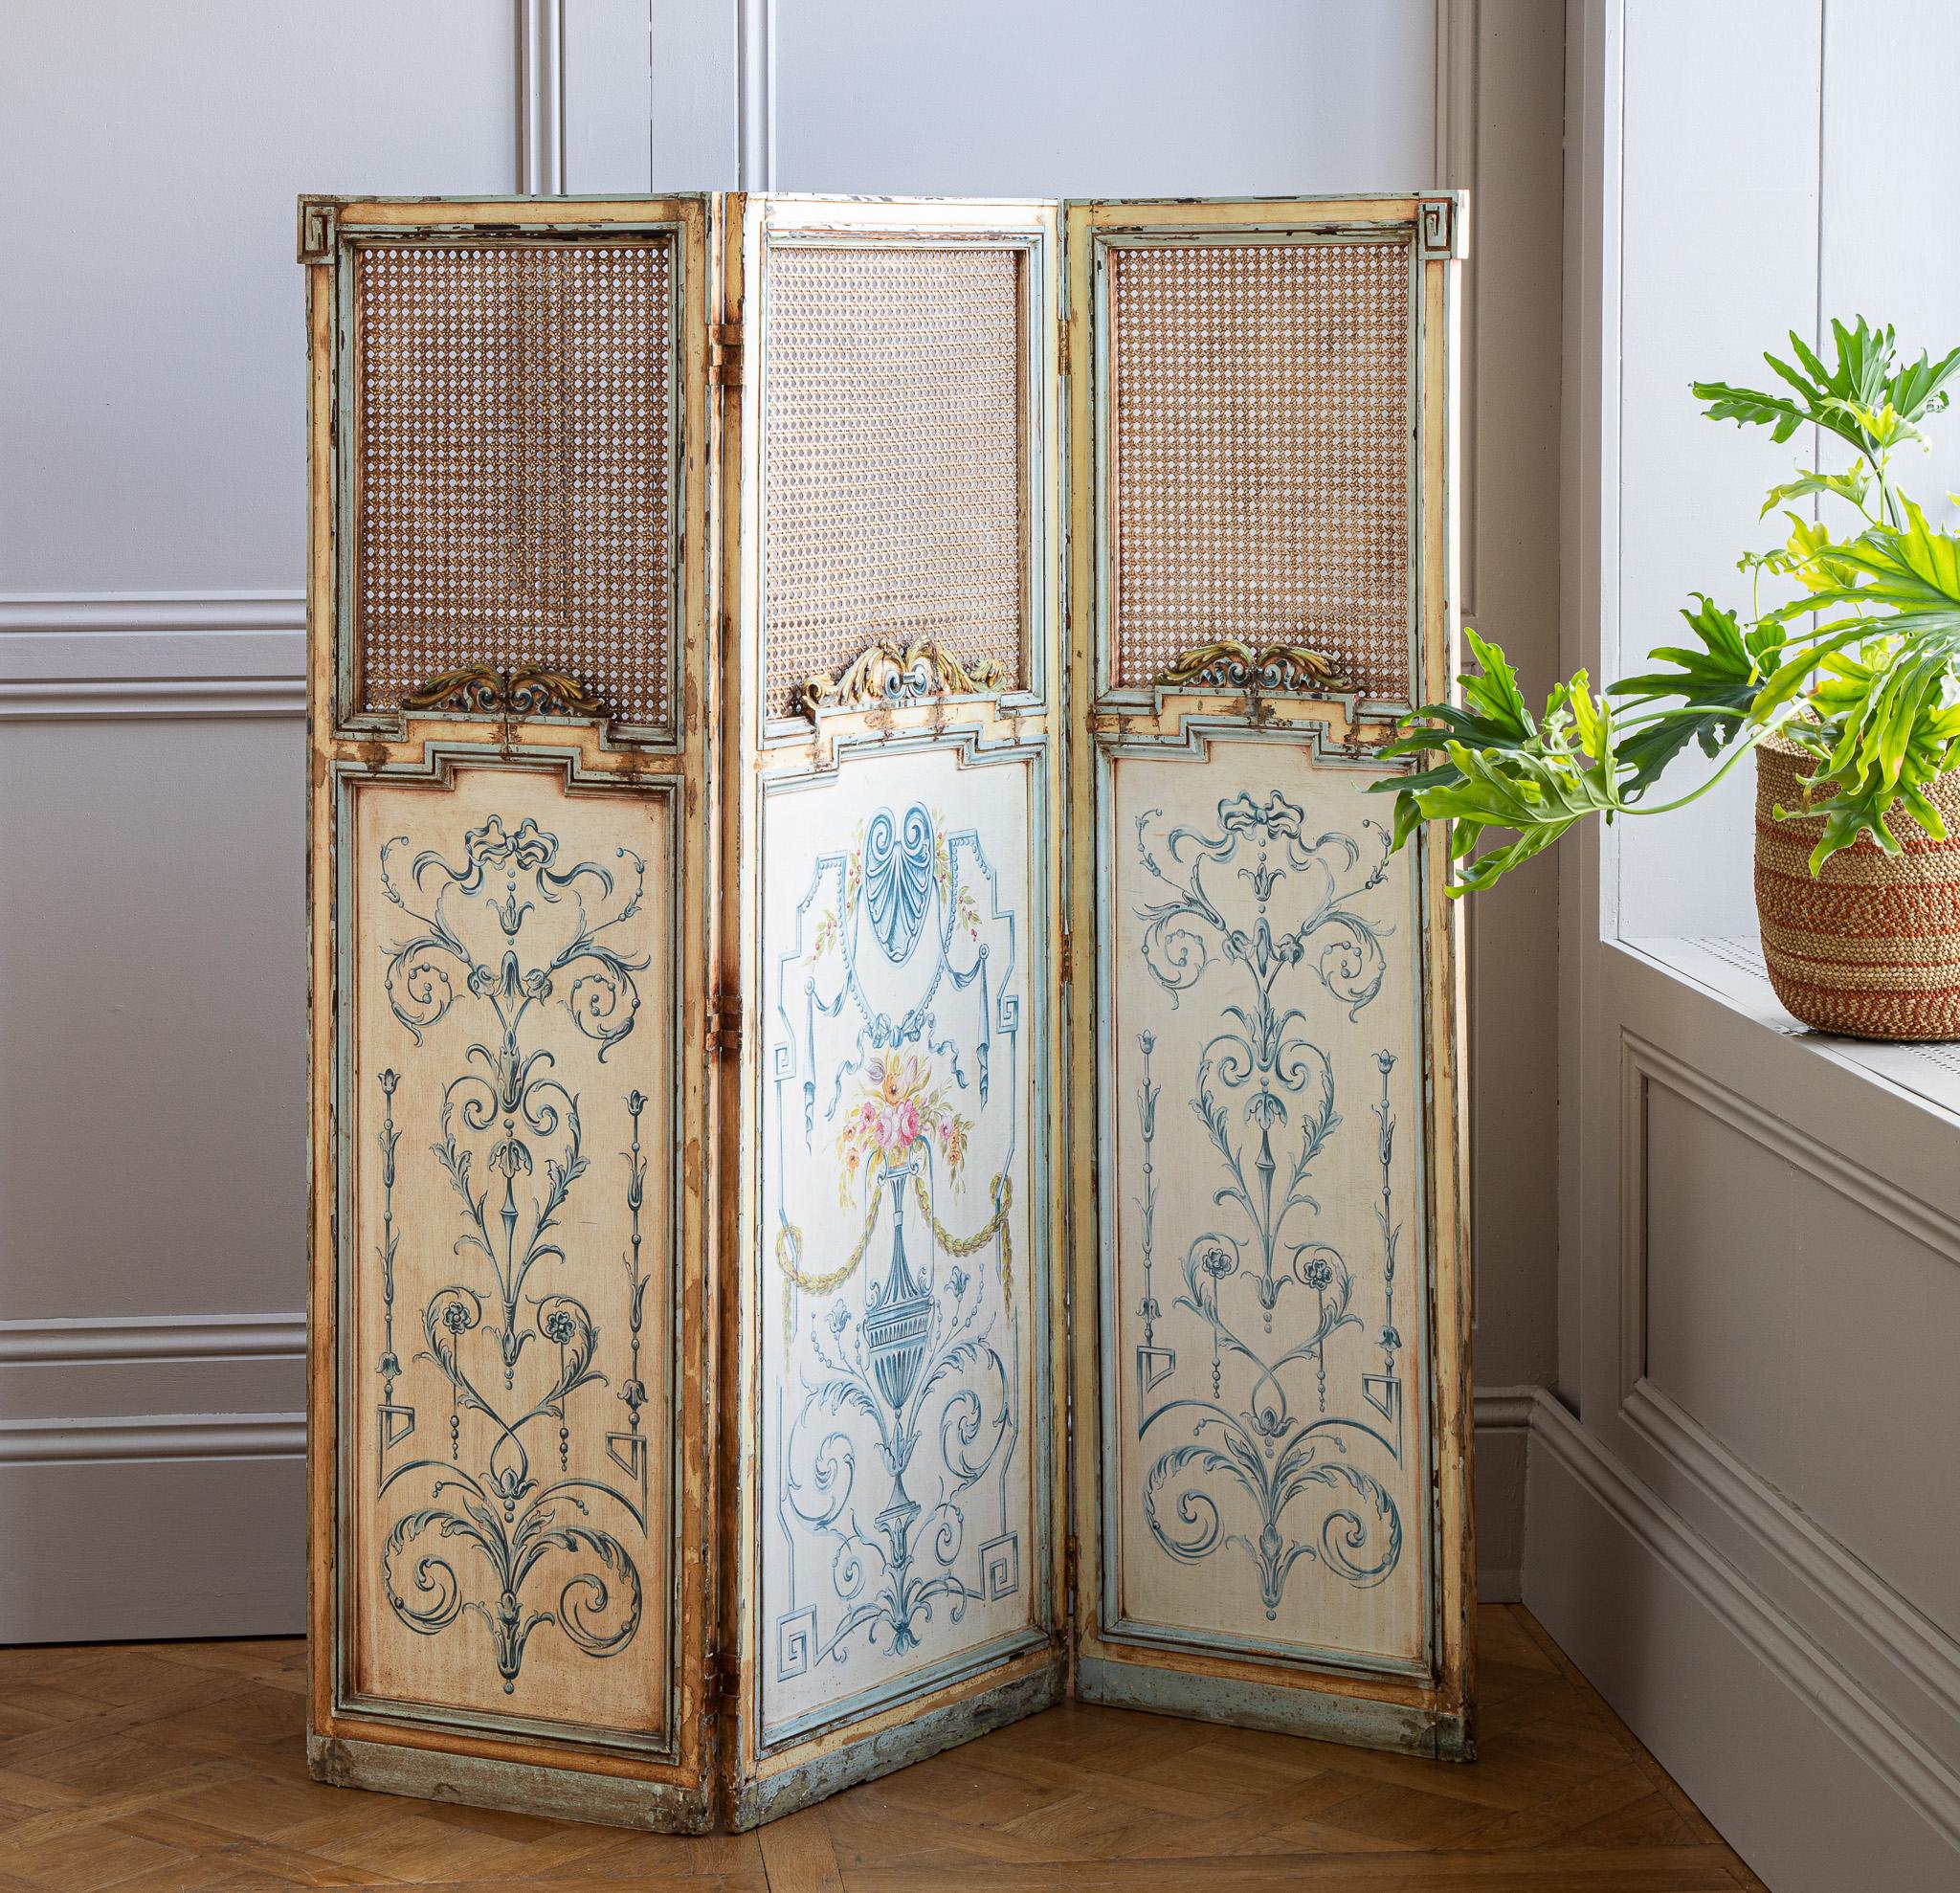 1900s French Antique Paravent Screen in Louis XVI style. Originating from France, it showcases traditional cane work and hand-painted details. Suitable for subtle room separation or as a decorative element.